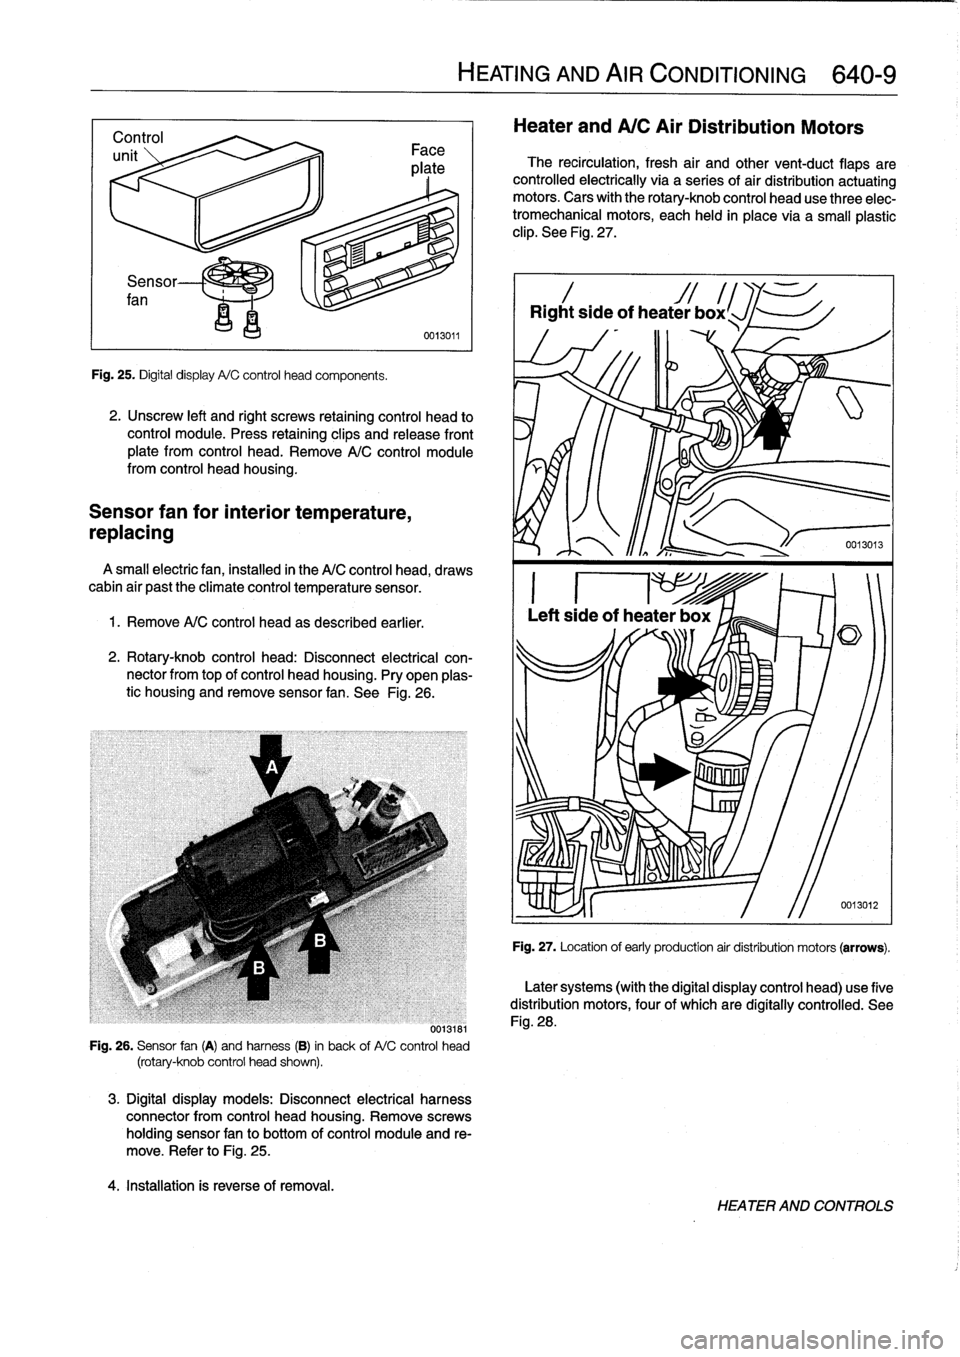 BMW 328i 1995 E36 Workshop Manual 
Sensor

fan

Fig
.
25
.
Digital
display
A/C
control
head
components
.

2
.
Unscrew
left
and
right
screws
retaining
control
head
to
control
module
.
Press
retaining
clips
and
release
front
plate
from
